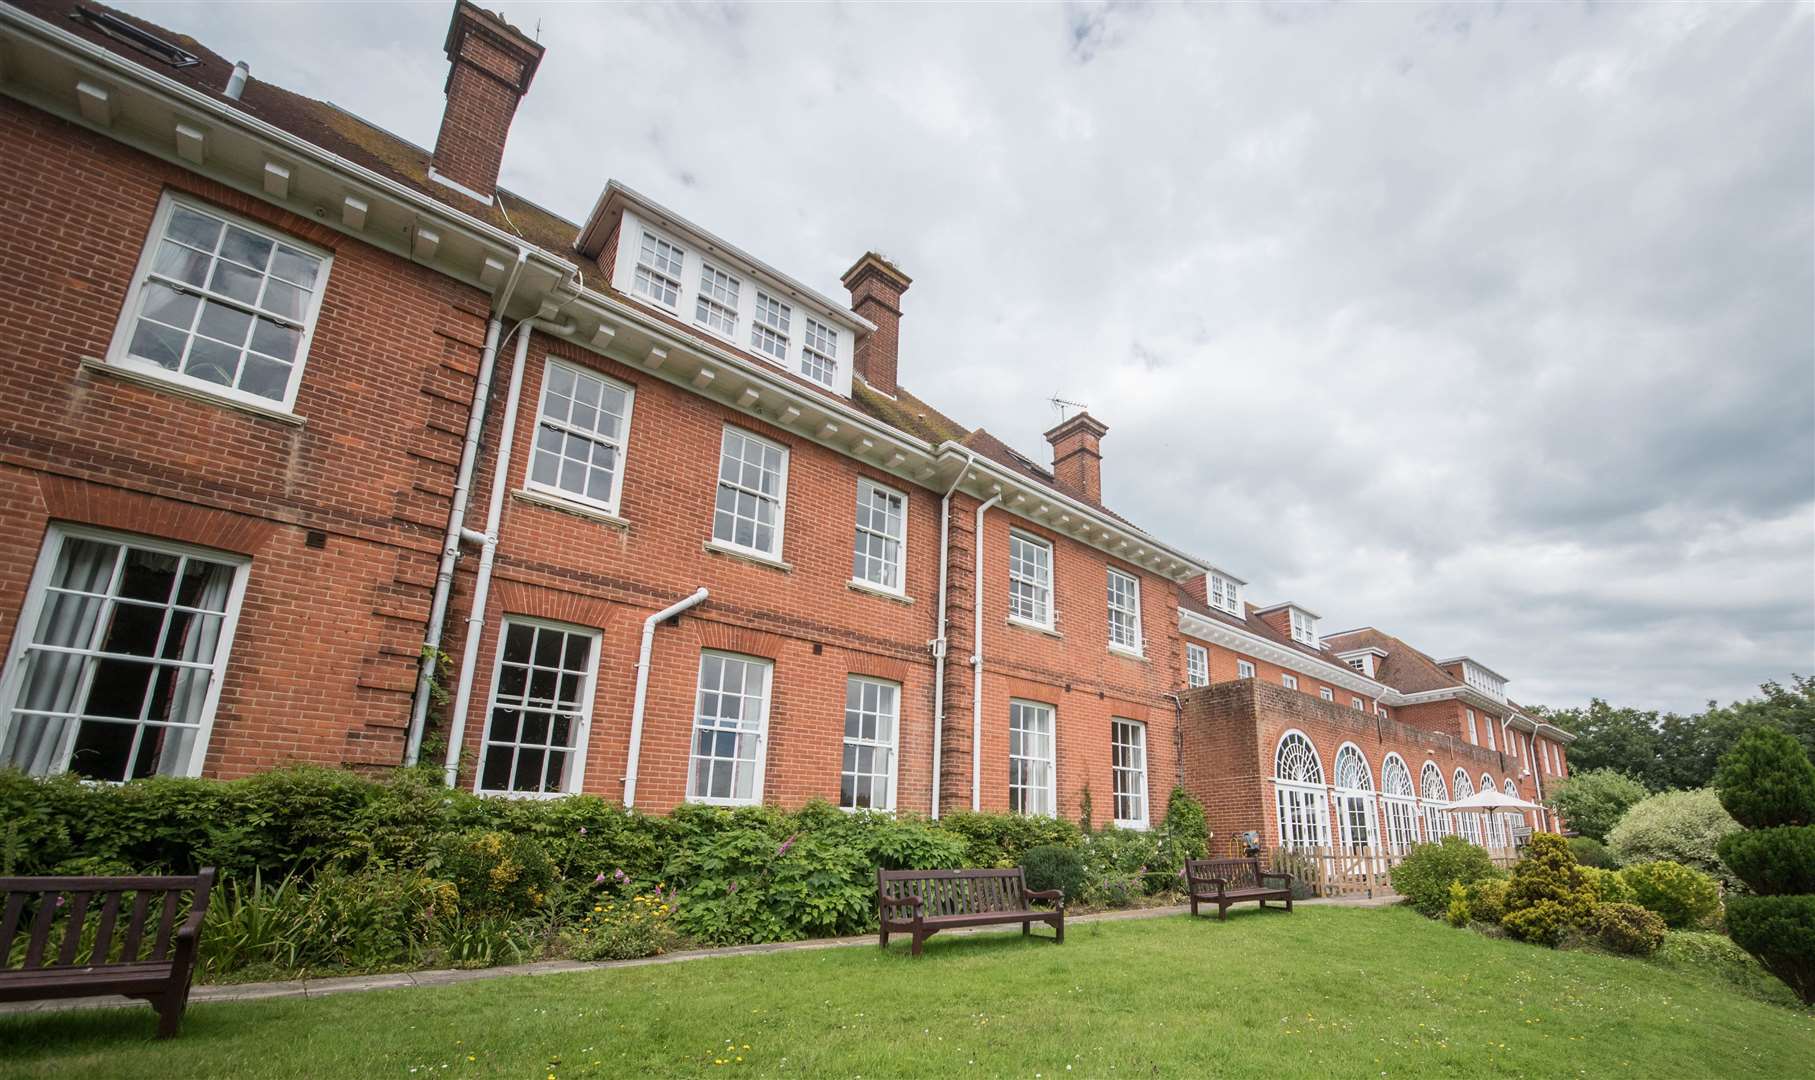 There are 66 bedrooms at Saltwood Care Centre